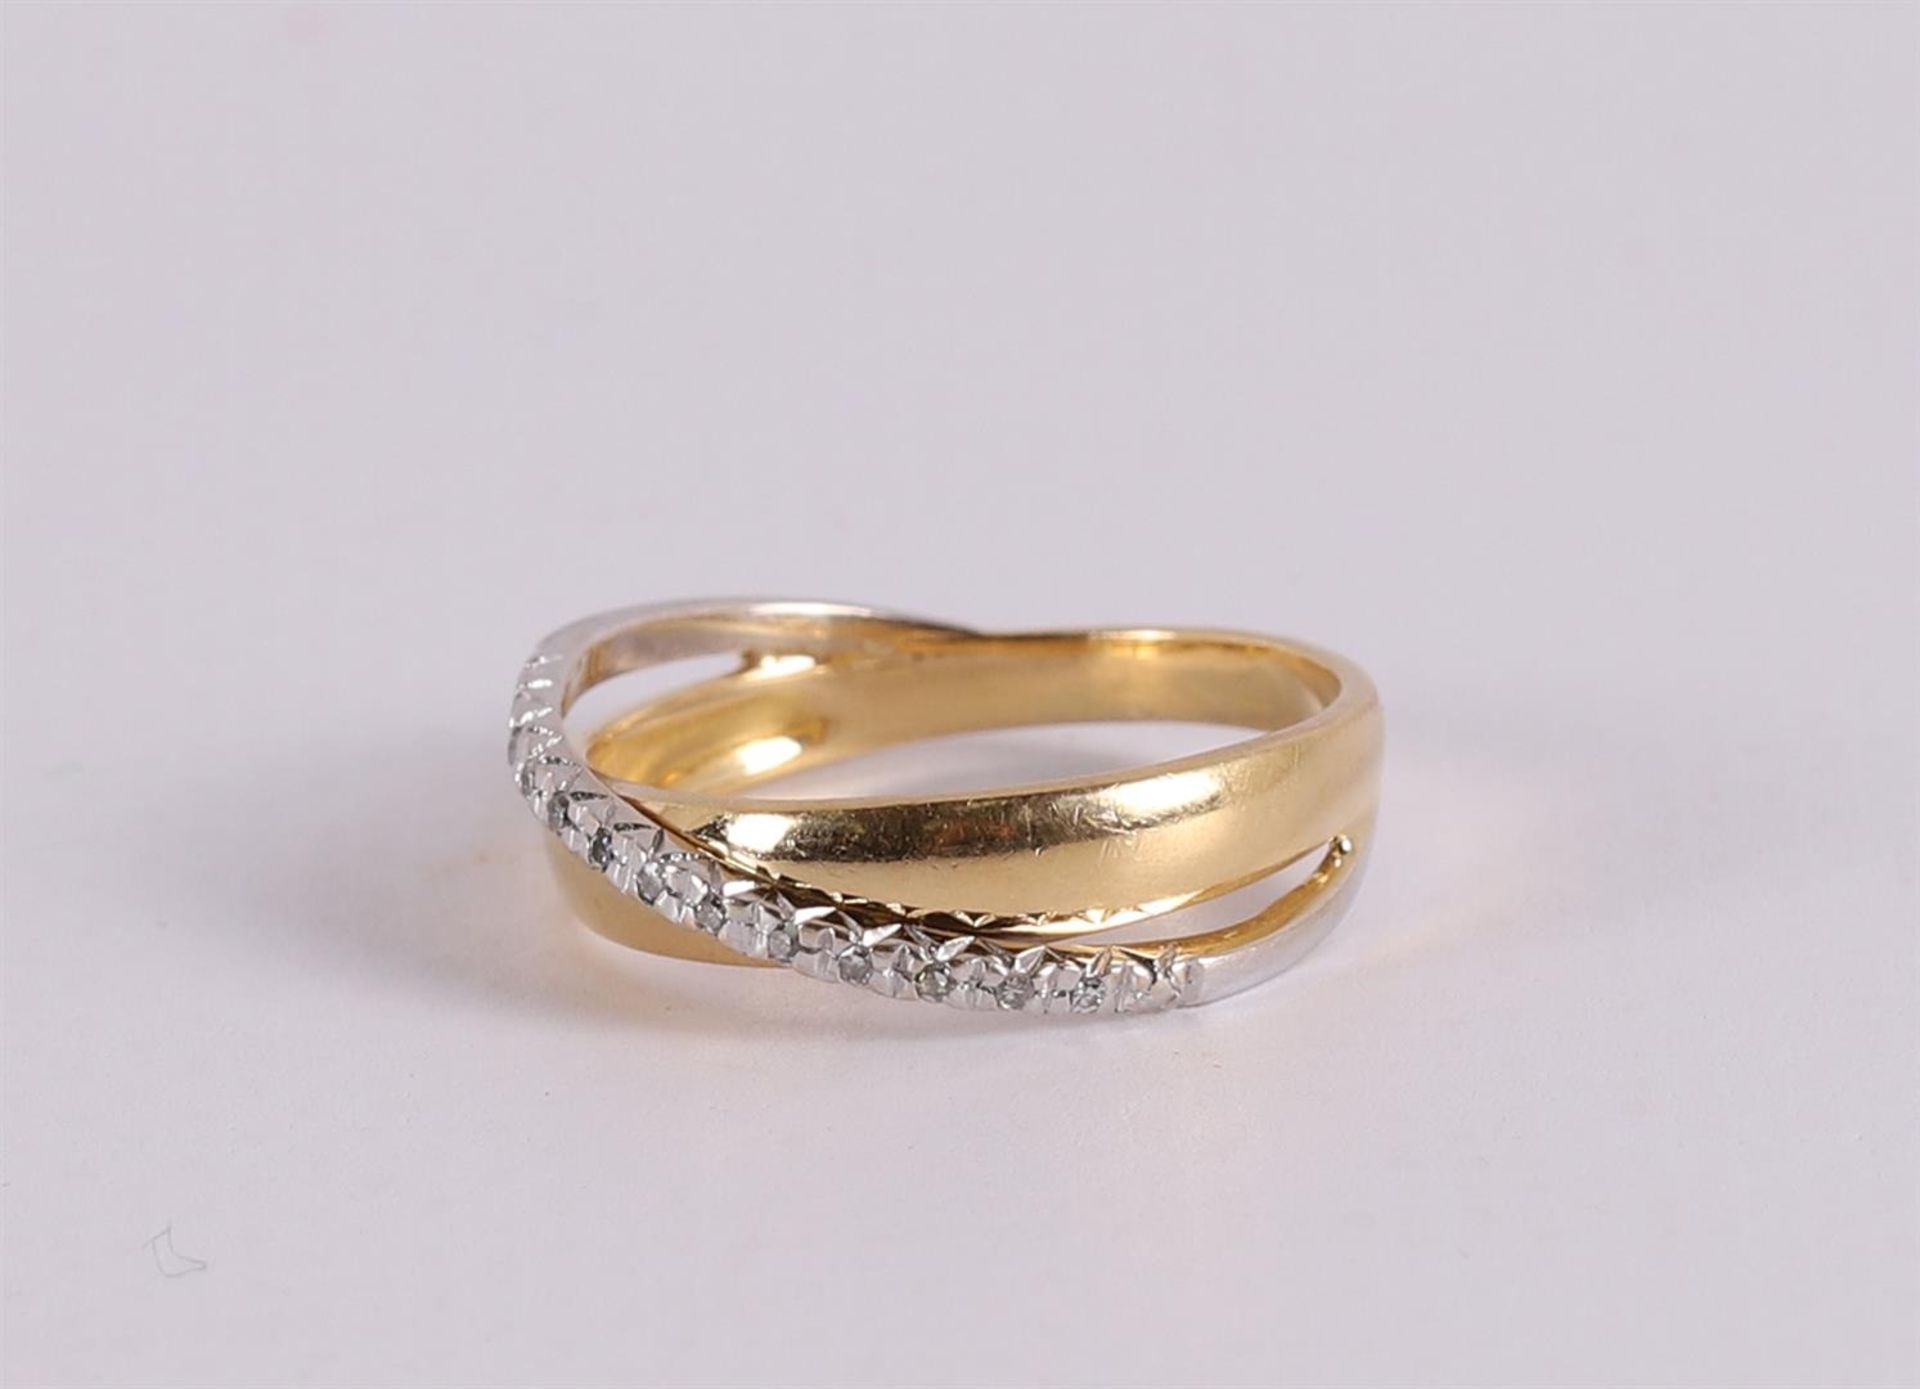 An 18 kt gold crossover ring with 12 octagonal cut diamonds. - Image 2 of 3